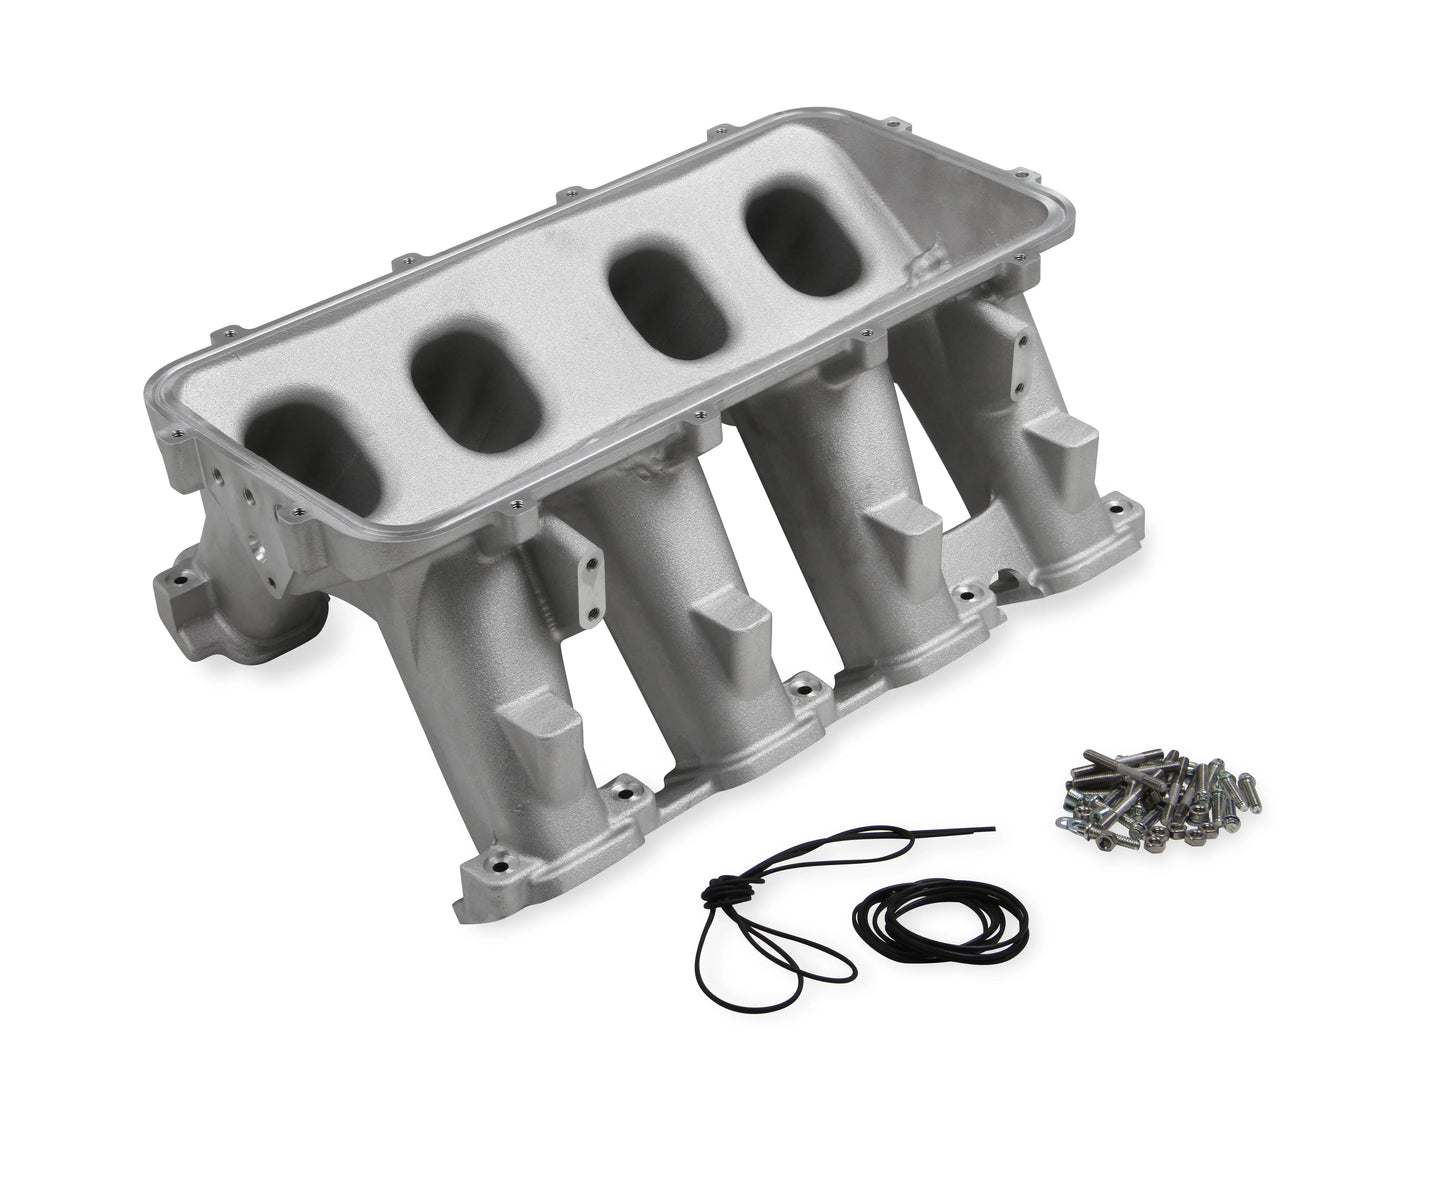 300-237 LT1 Hi-Ram, Lower Manifold Only w/out Port EFI Provisions